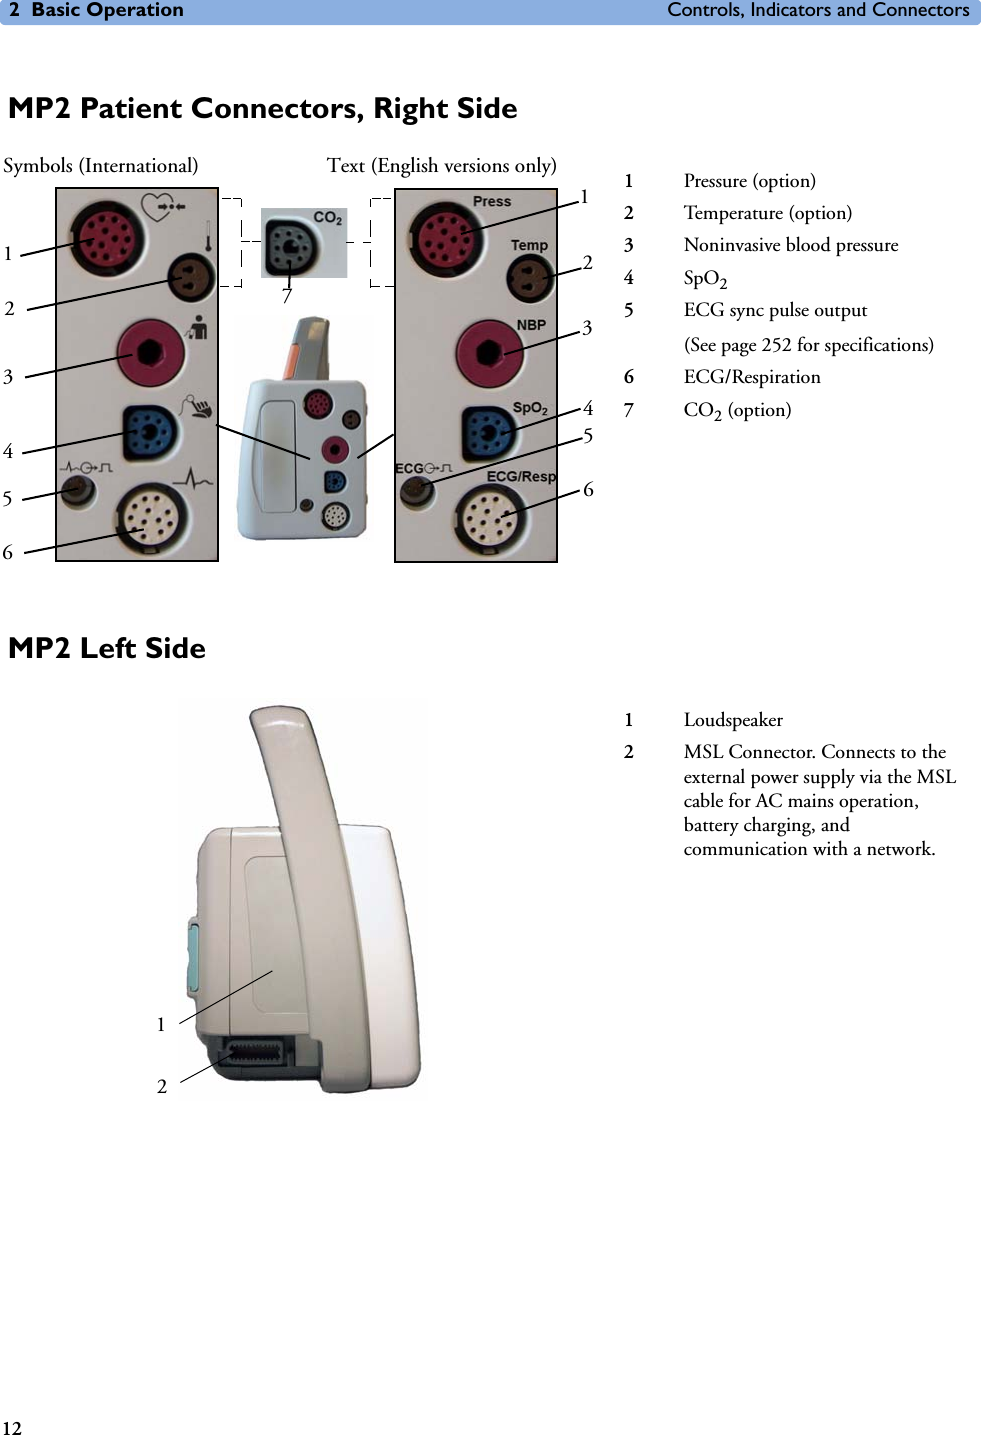 2 Basic Operation Controls, Indicators and Connectors12MP2 Patient Connectors, Right Side1Pressure (option)2Temperature (option)3Noninvasive blood pressure4SpO25ECG sync pulse output(See page 252 for specifications)6ECG/Respiration7CO2 (option)124356654321123456Symbols (International) Text (English versions only)7MP2 Left Side1Loudspeaker2MSL Connector. Connects to the external power supply via the MSL cable for AC mains operation, battery charging, and communication with a network.21